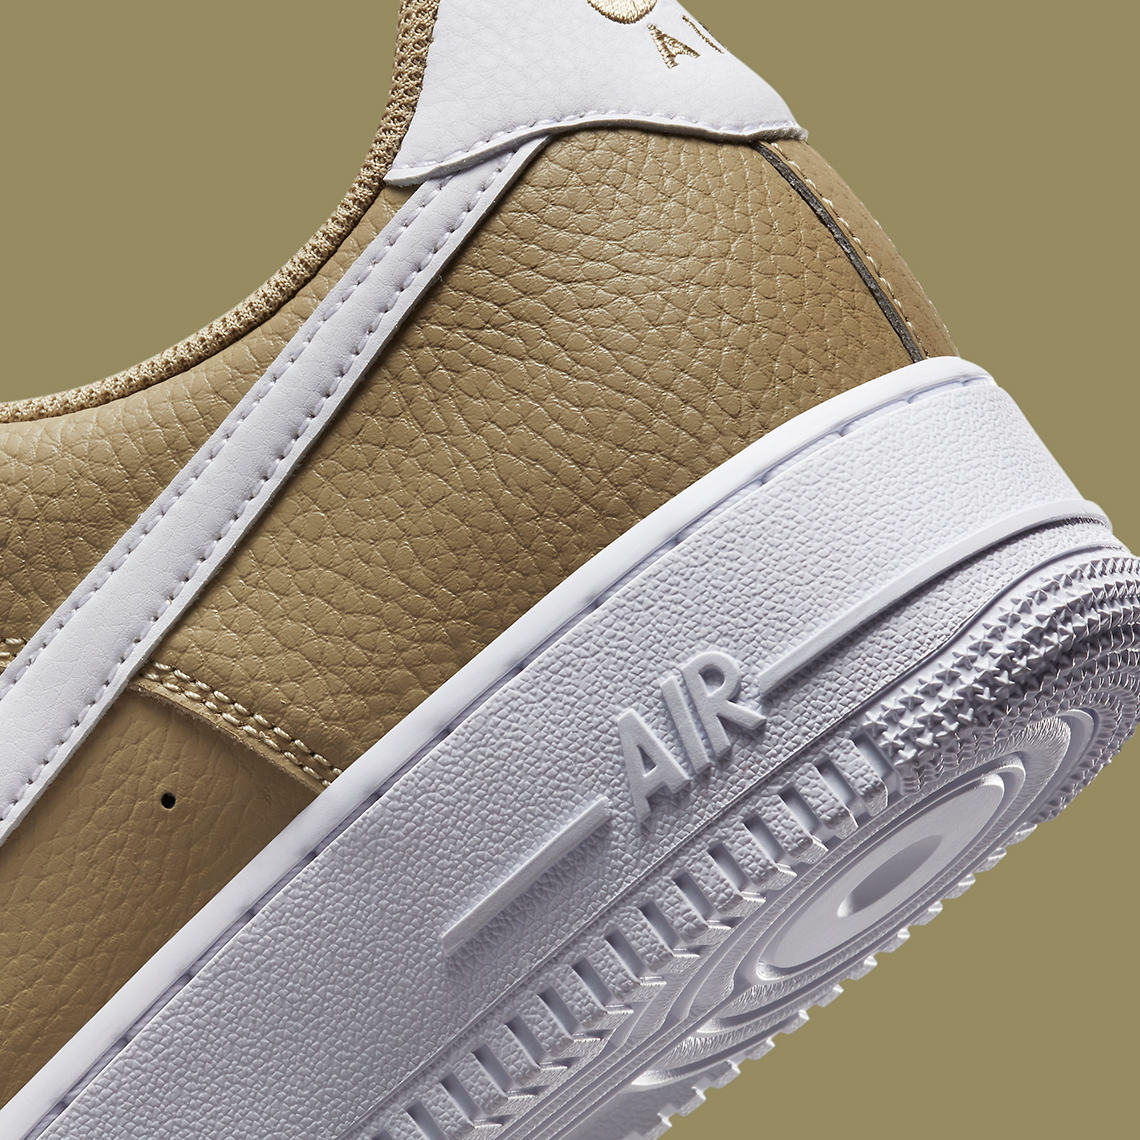 Nike Air Force 1 Double Swoosh Twilight Marsh Olive sneakers 